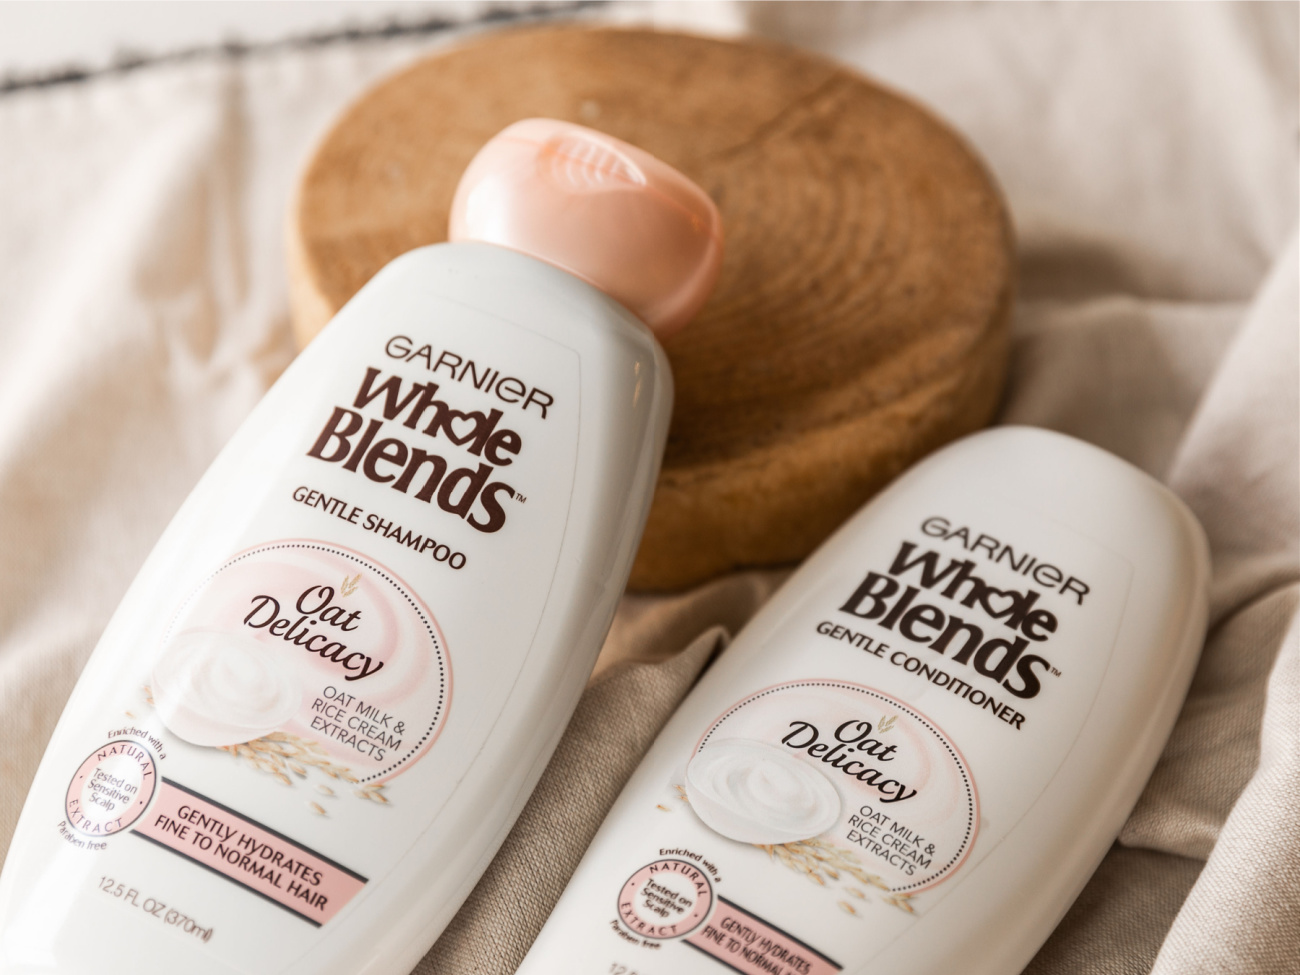 Garnier Whole Blends Hair Care As Low As 50¢ At Kroger